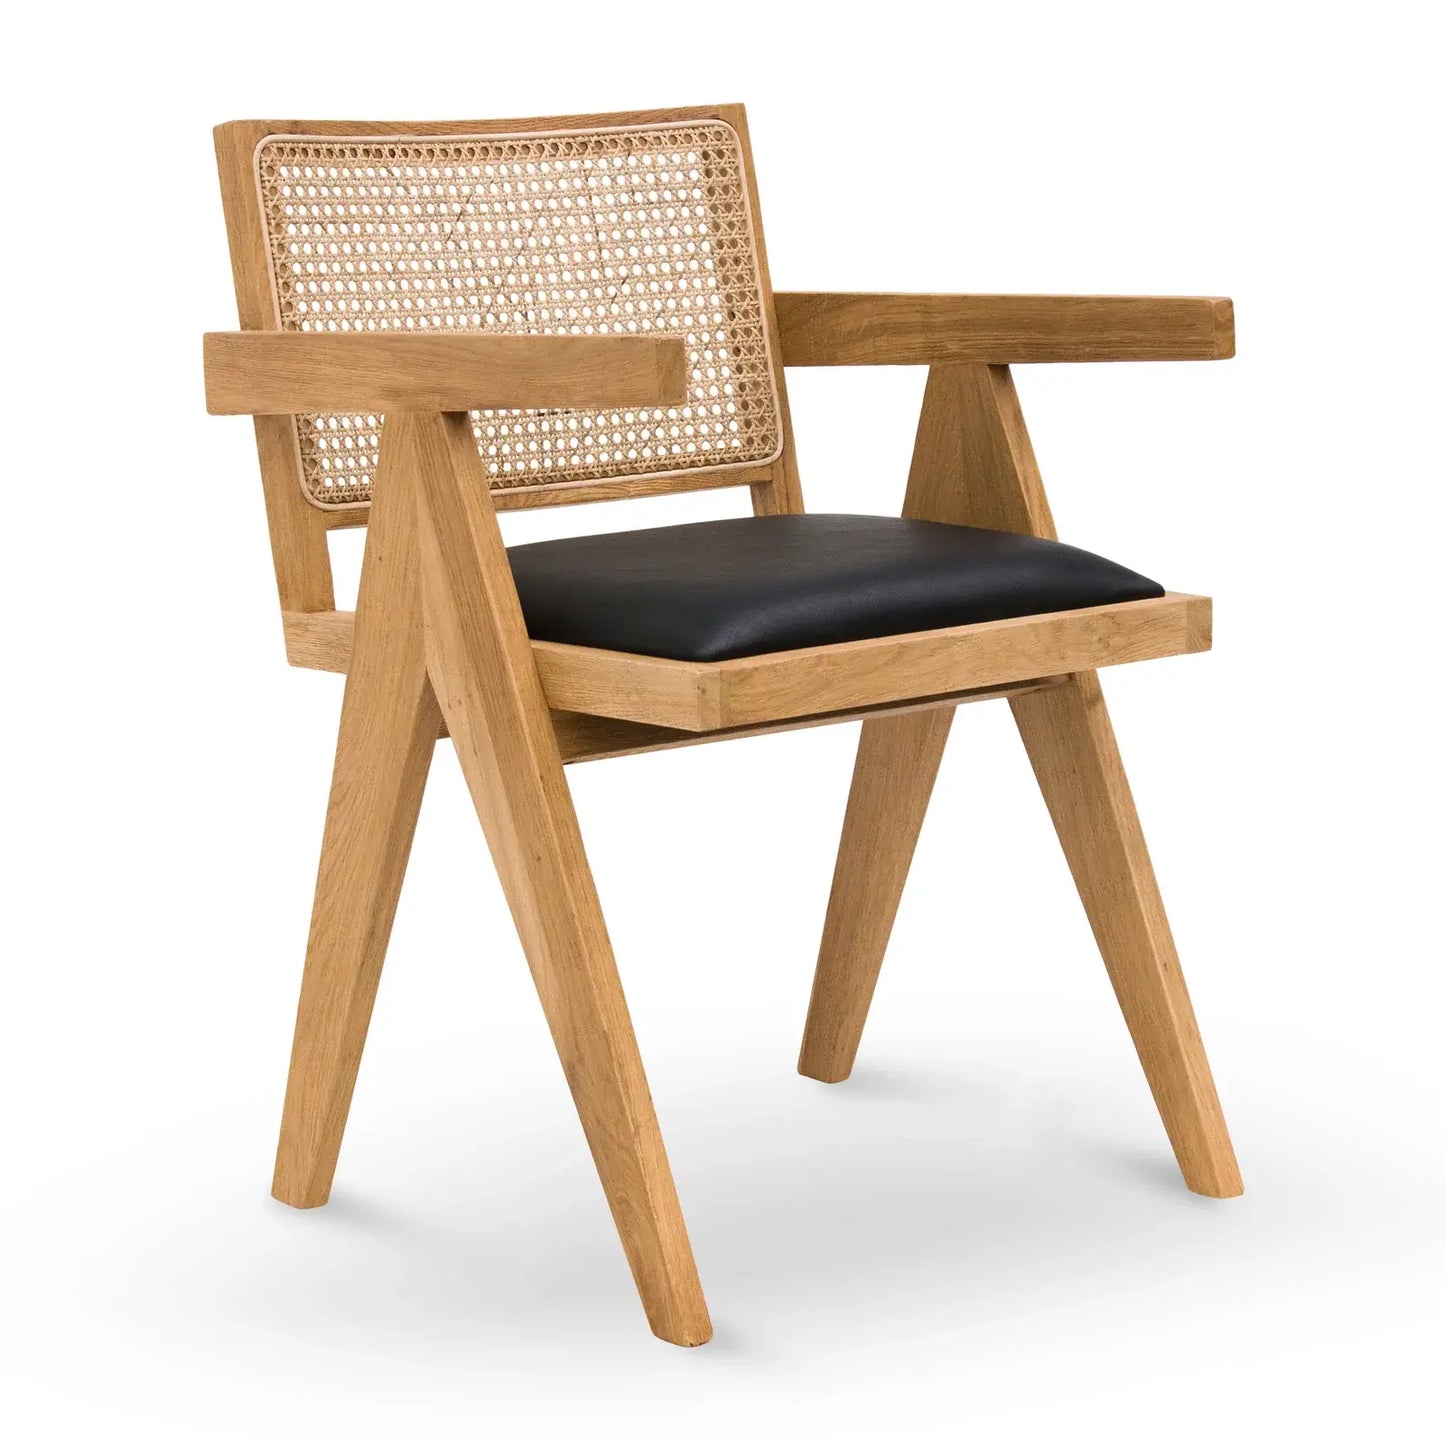 Oak View | Rattan PU Leather Wooden Dining Chair With Arms | Natural